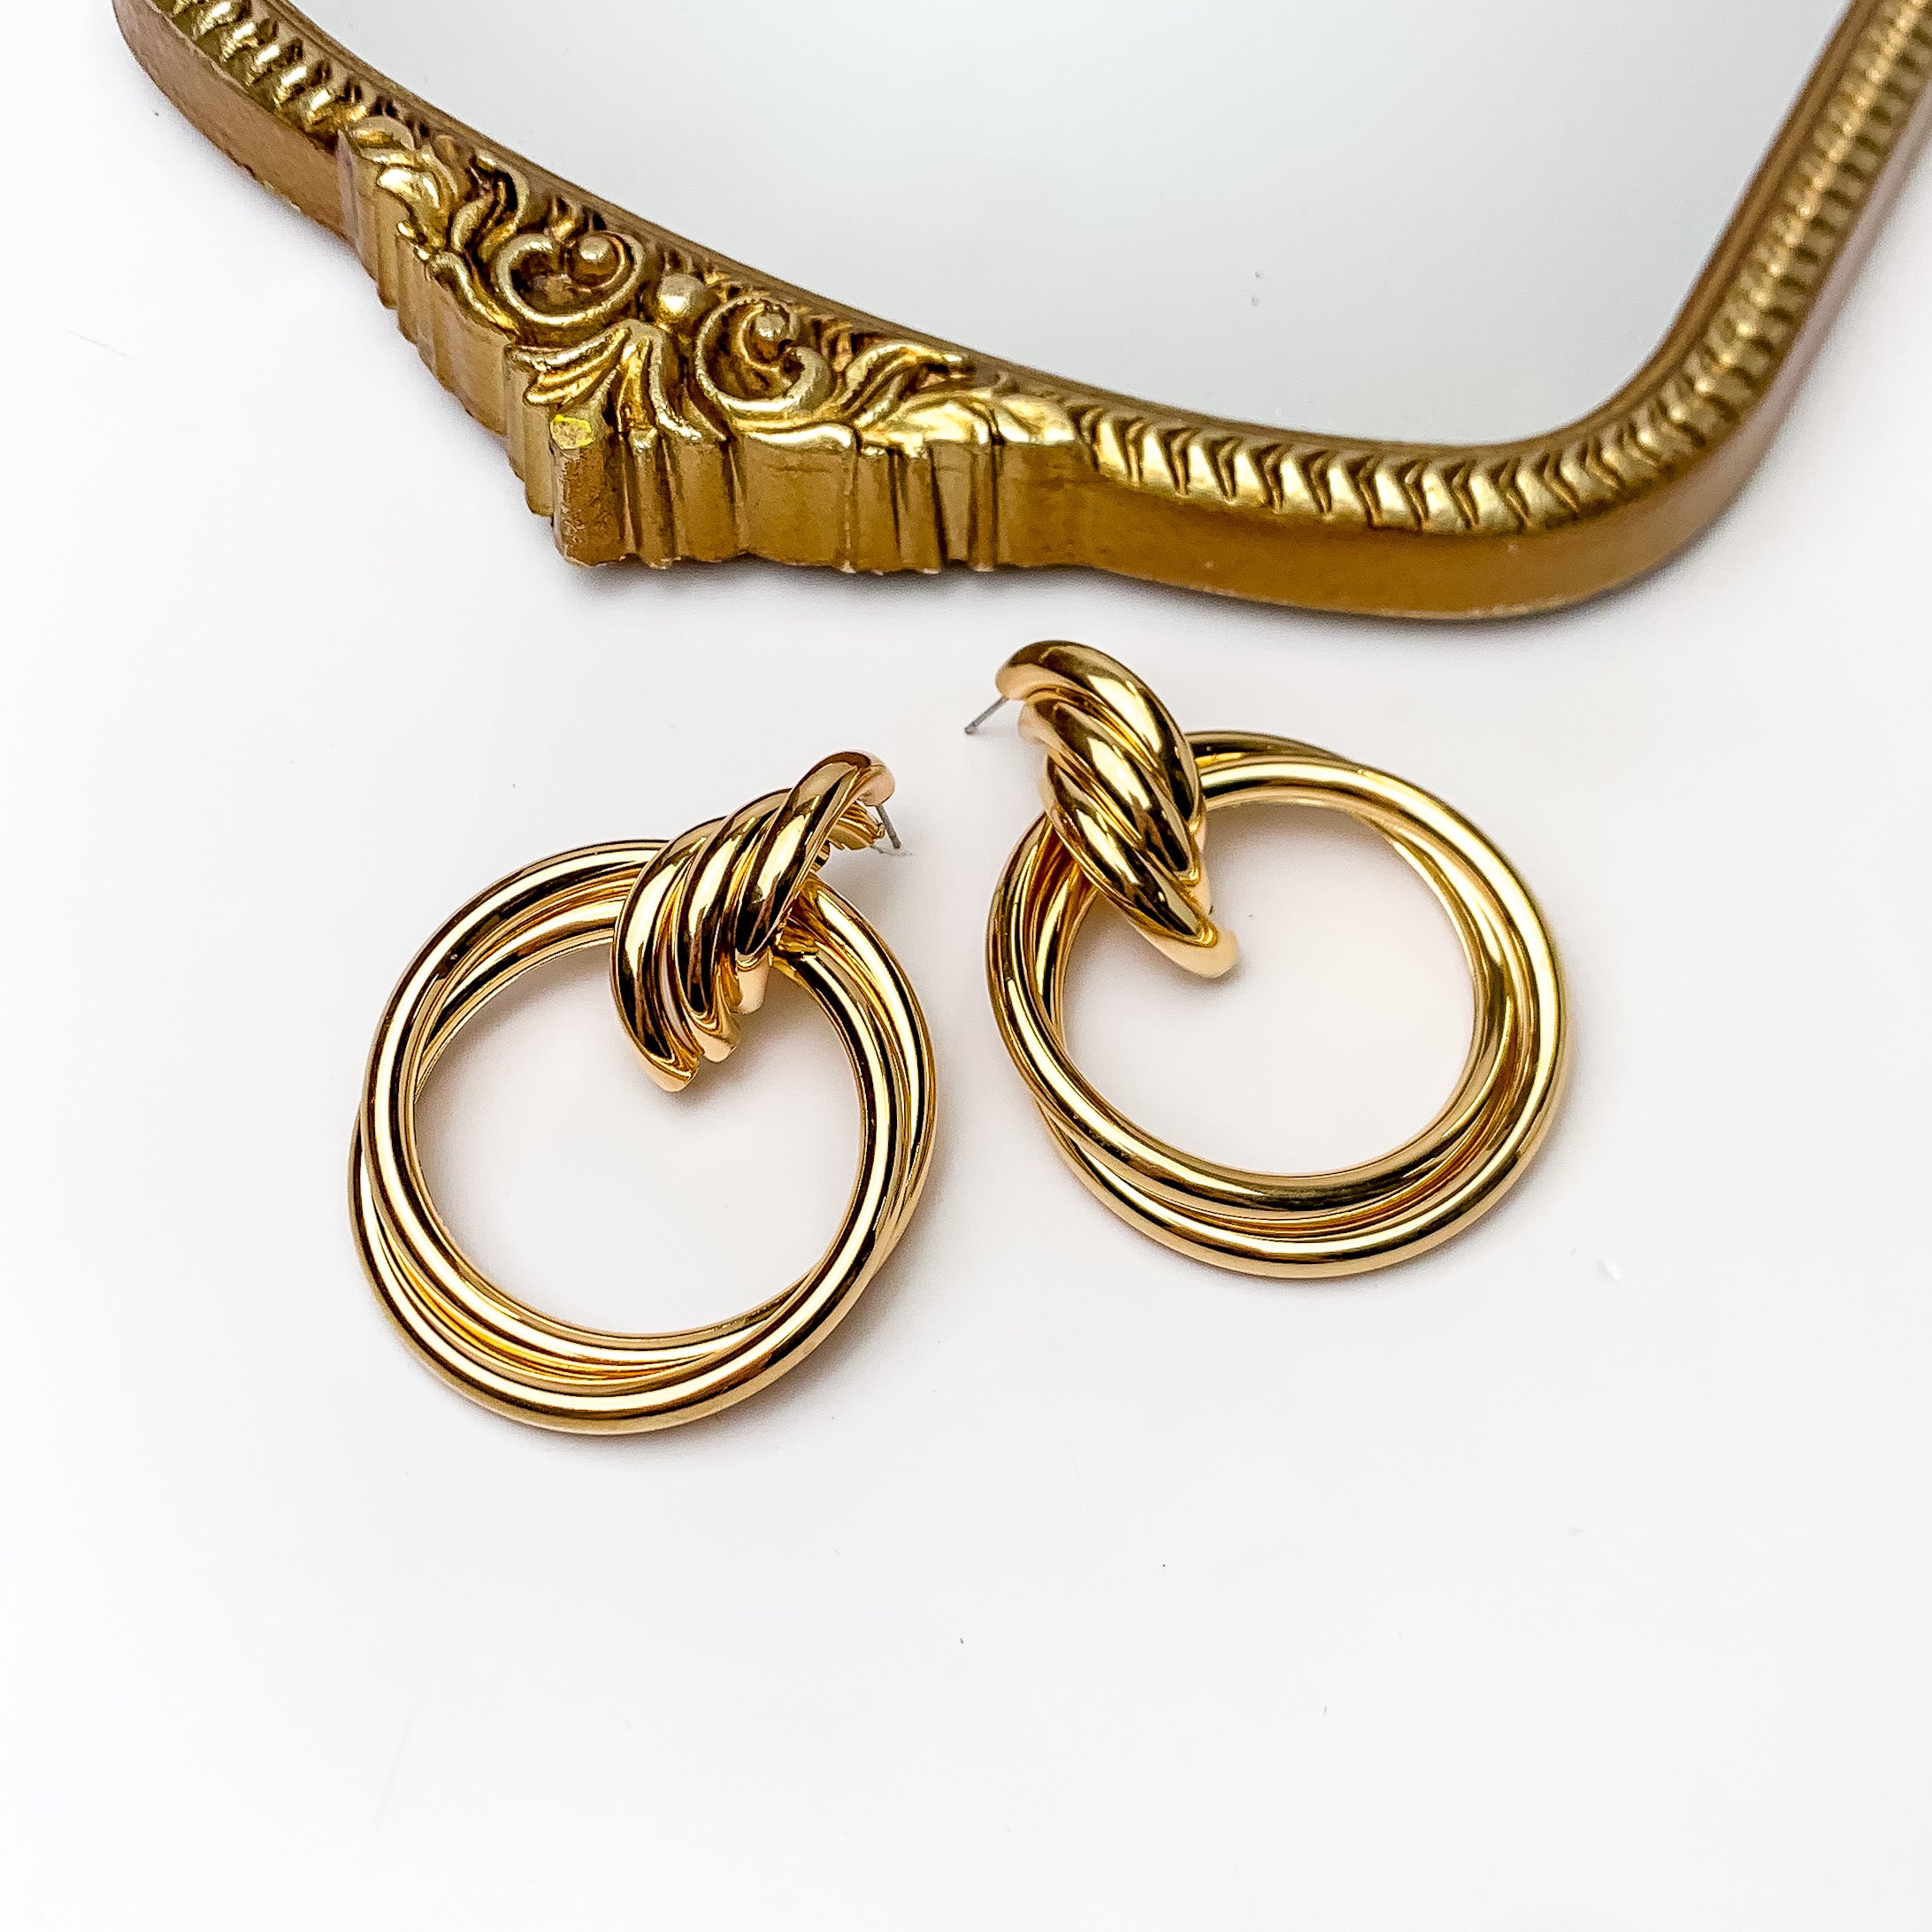 Gold Tone Large Twisted Post Circle Earrings. Pictured on a white background with a gold frame above the earrings.